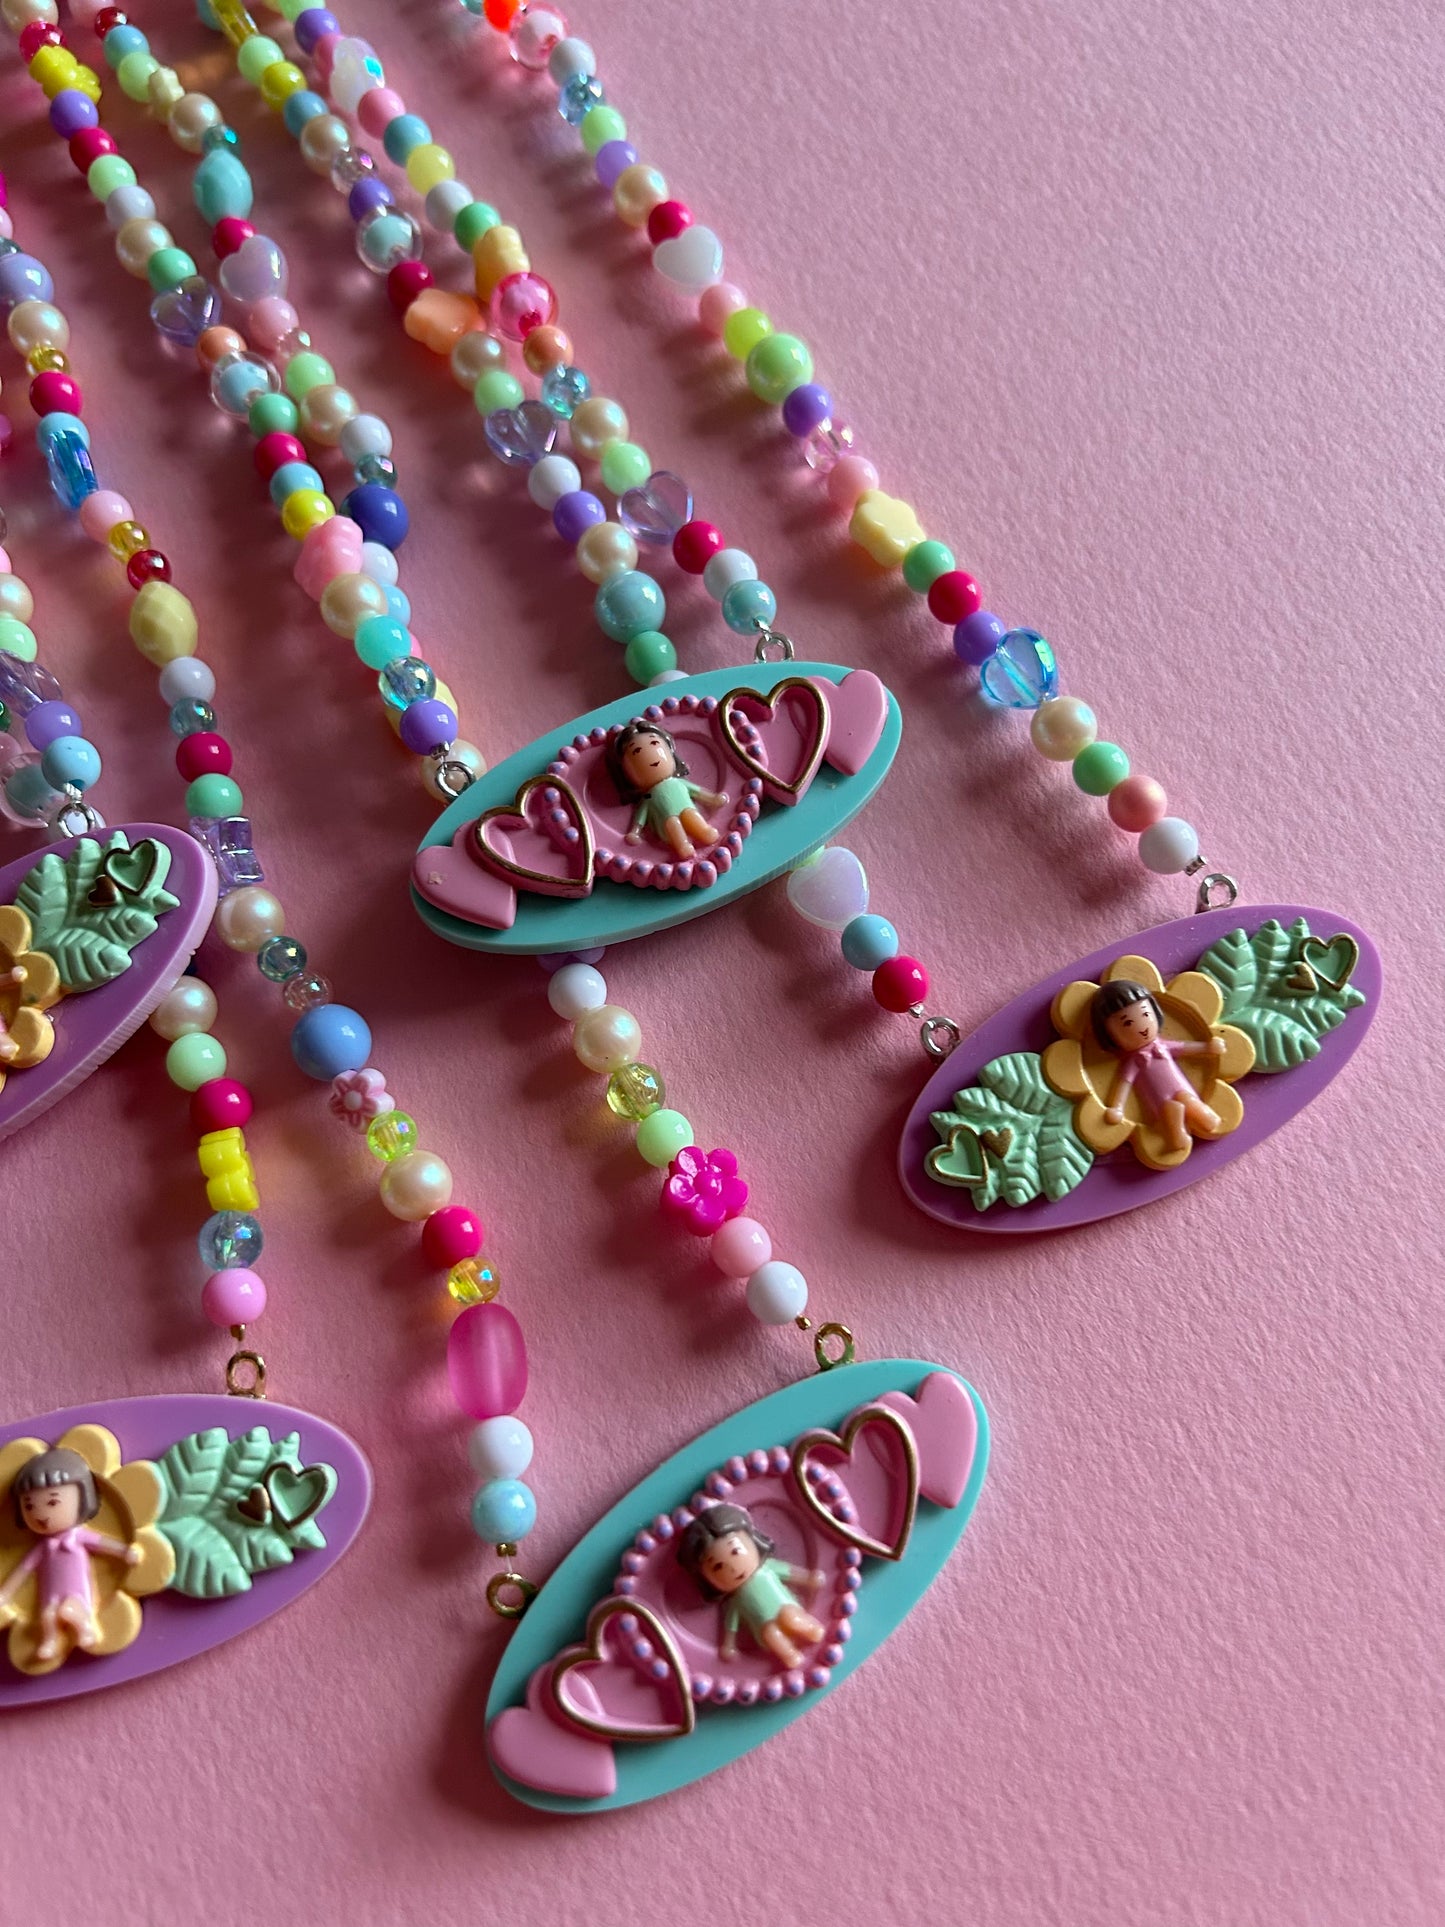 Polly Pocket Girly Beaded Necklaces